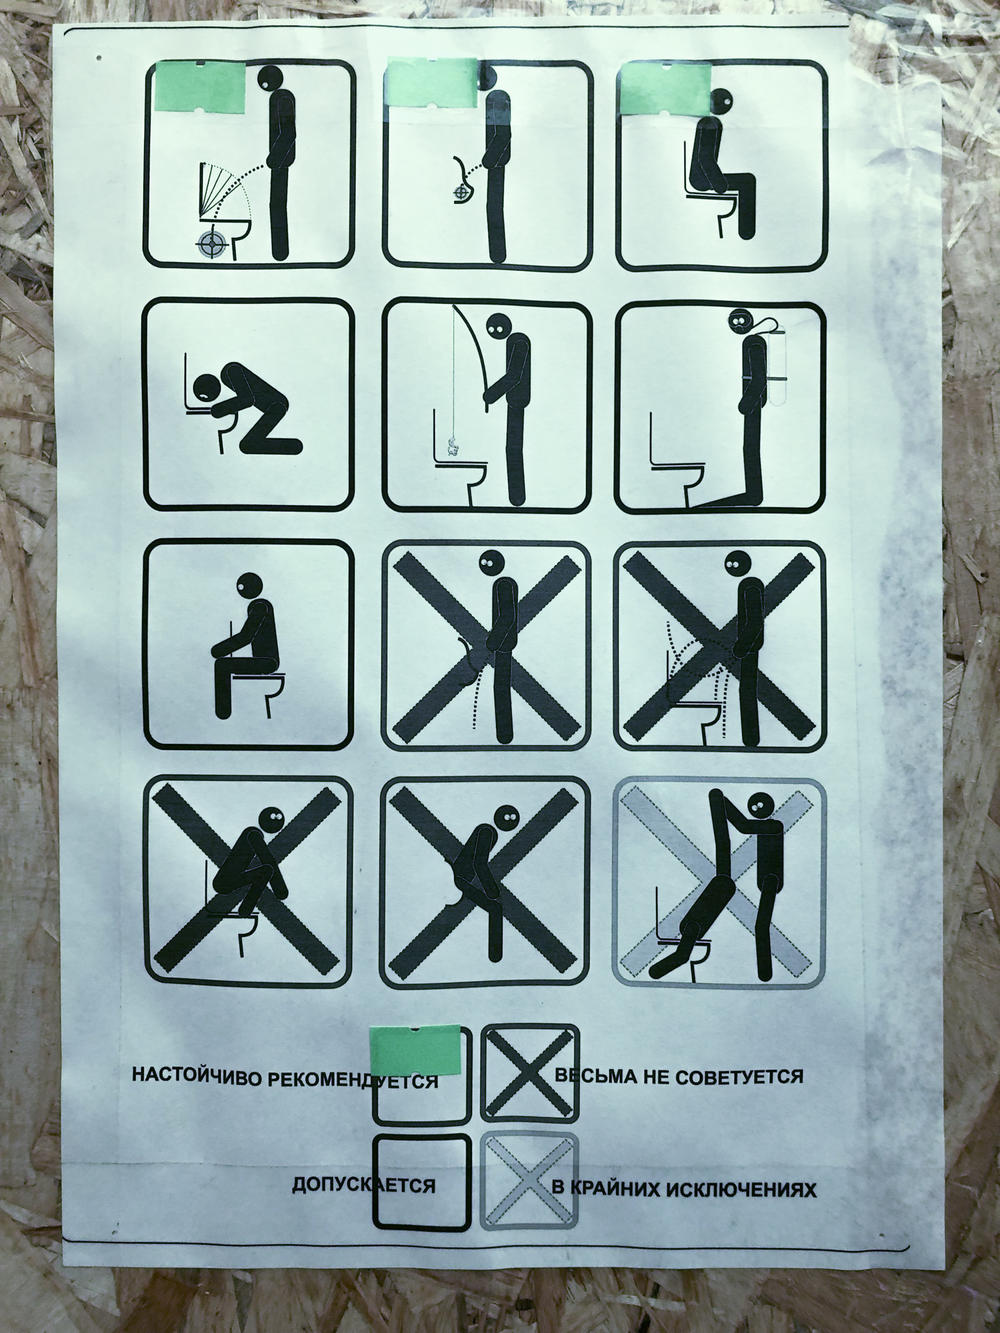 David Hudson came across this sign on a motorcycle trip through Russia. The key below explains the chart in Russian: Boxes with a green tab are 